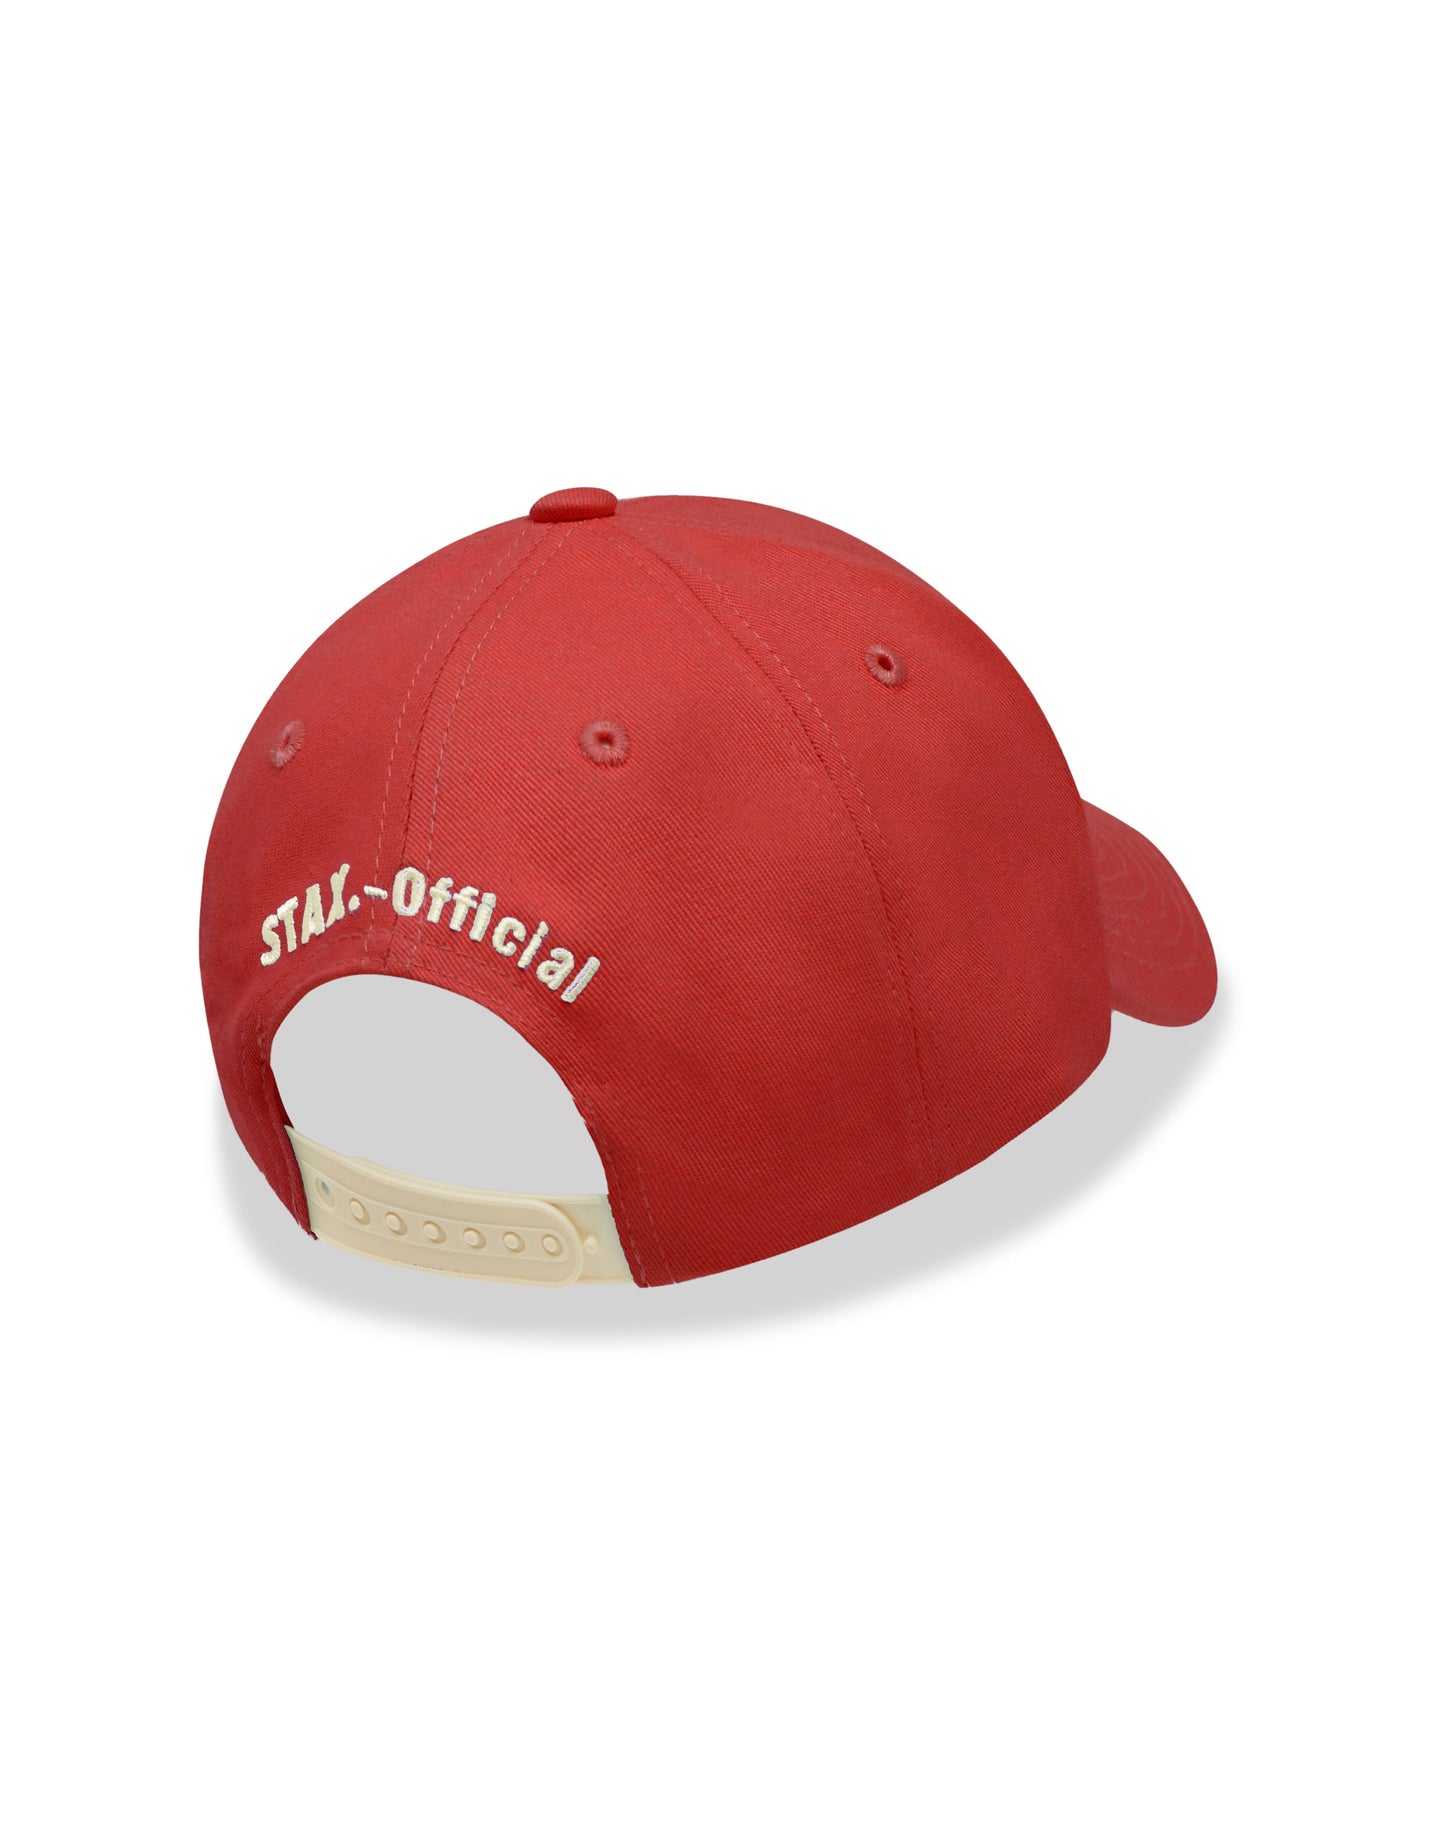 STAXOFFICIAL A Frame Cap - Red